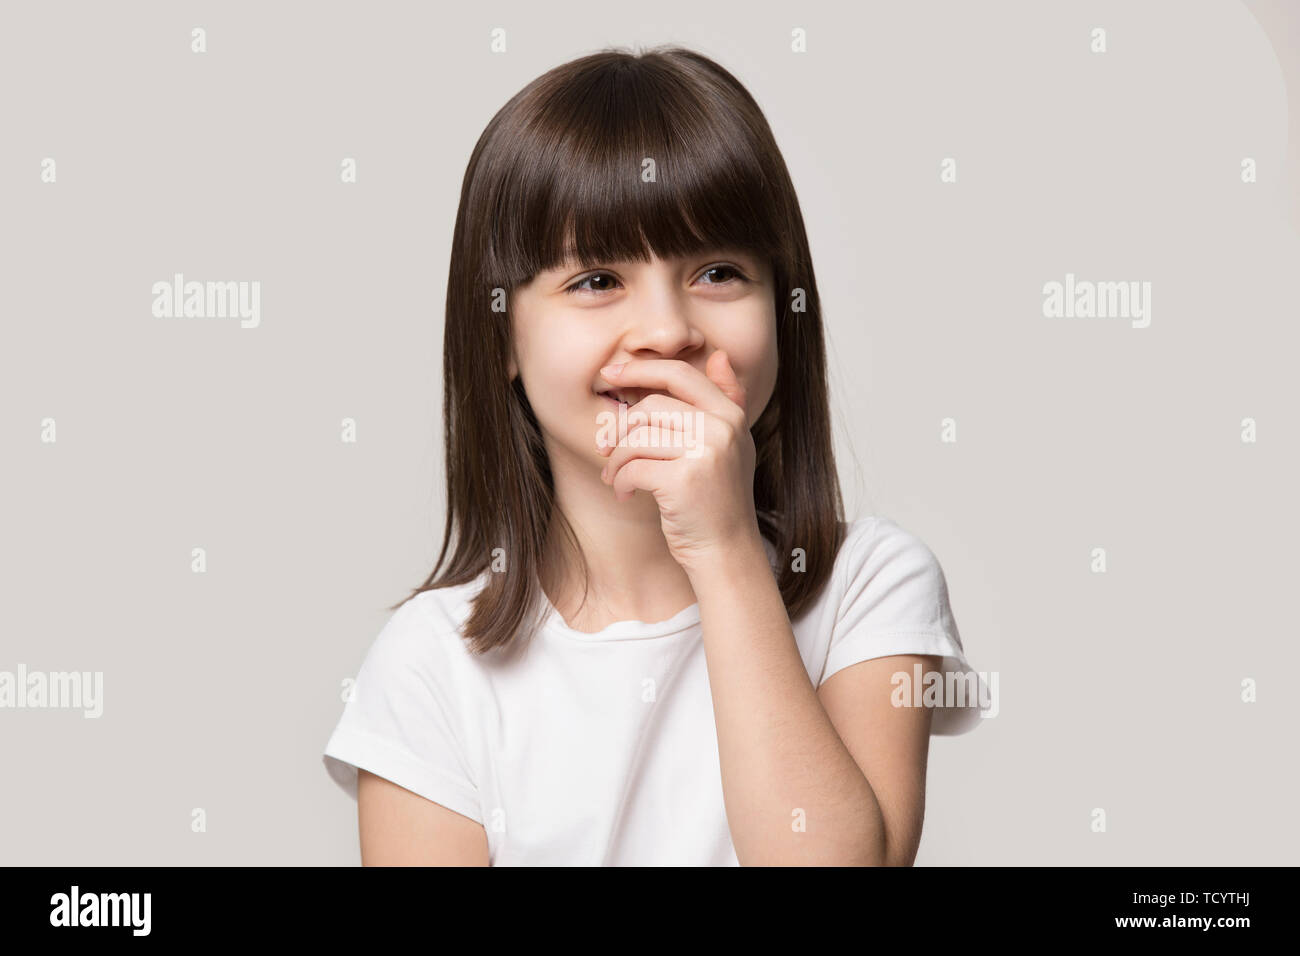 Laughing shy cute girl isolated on grey studio background Stock Photo